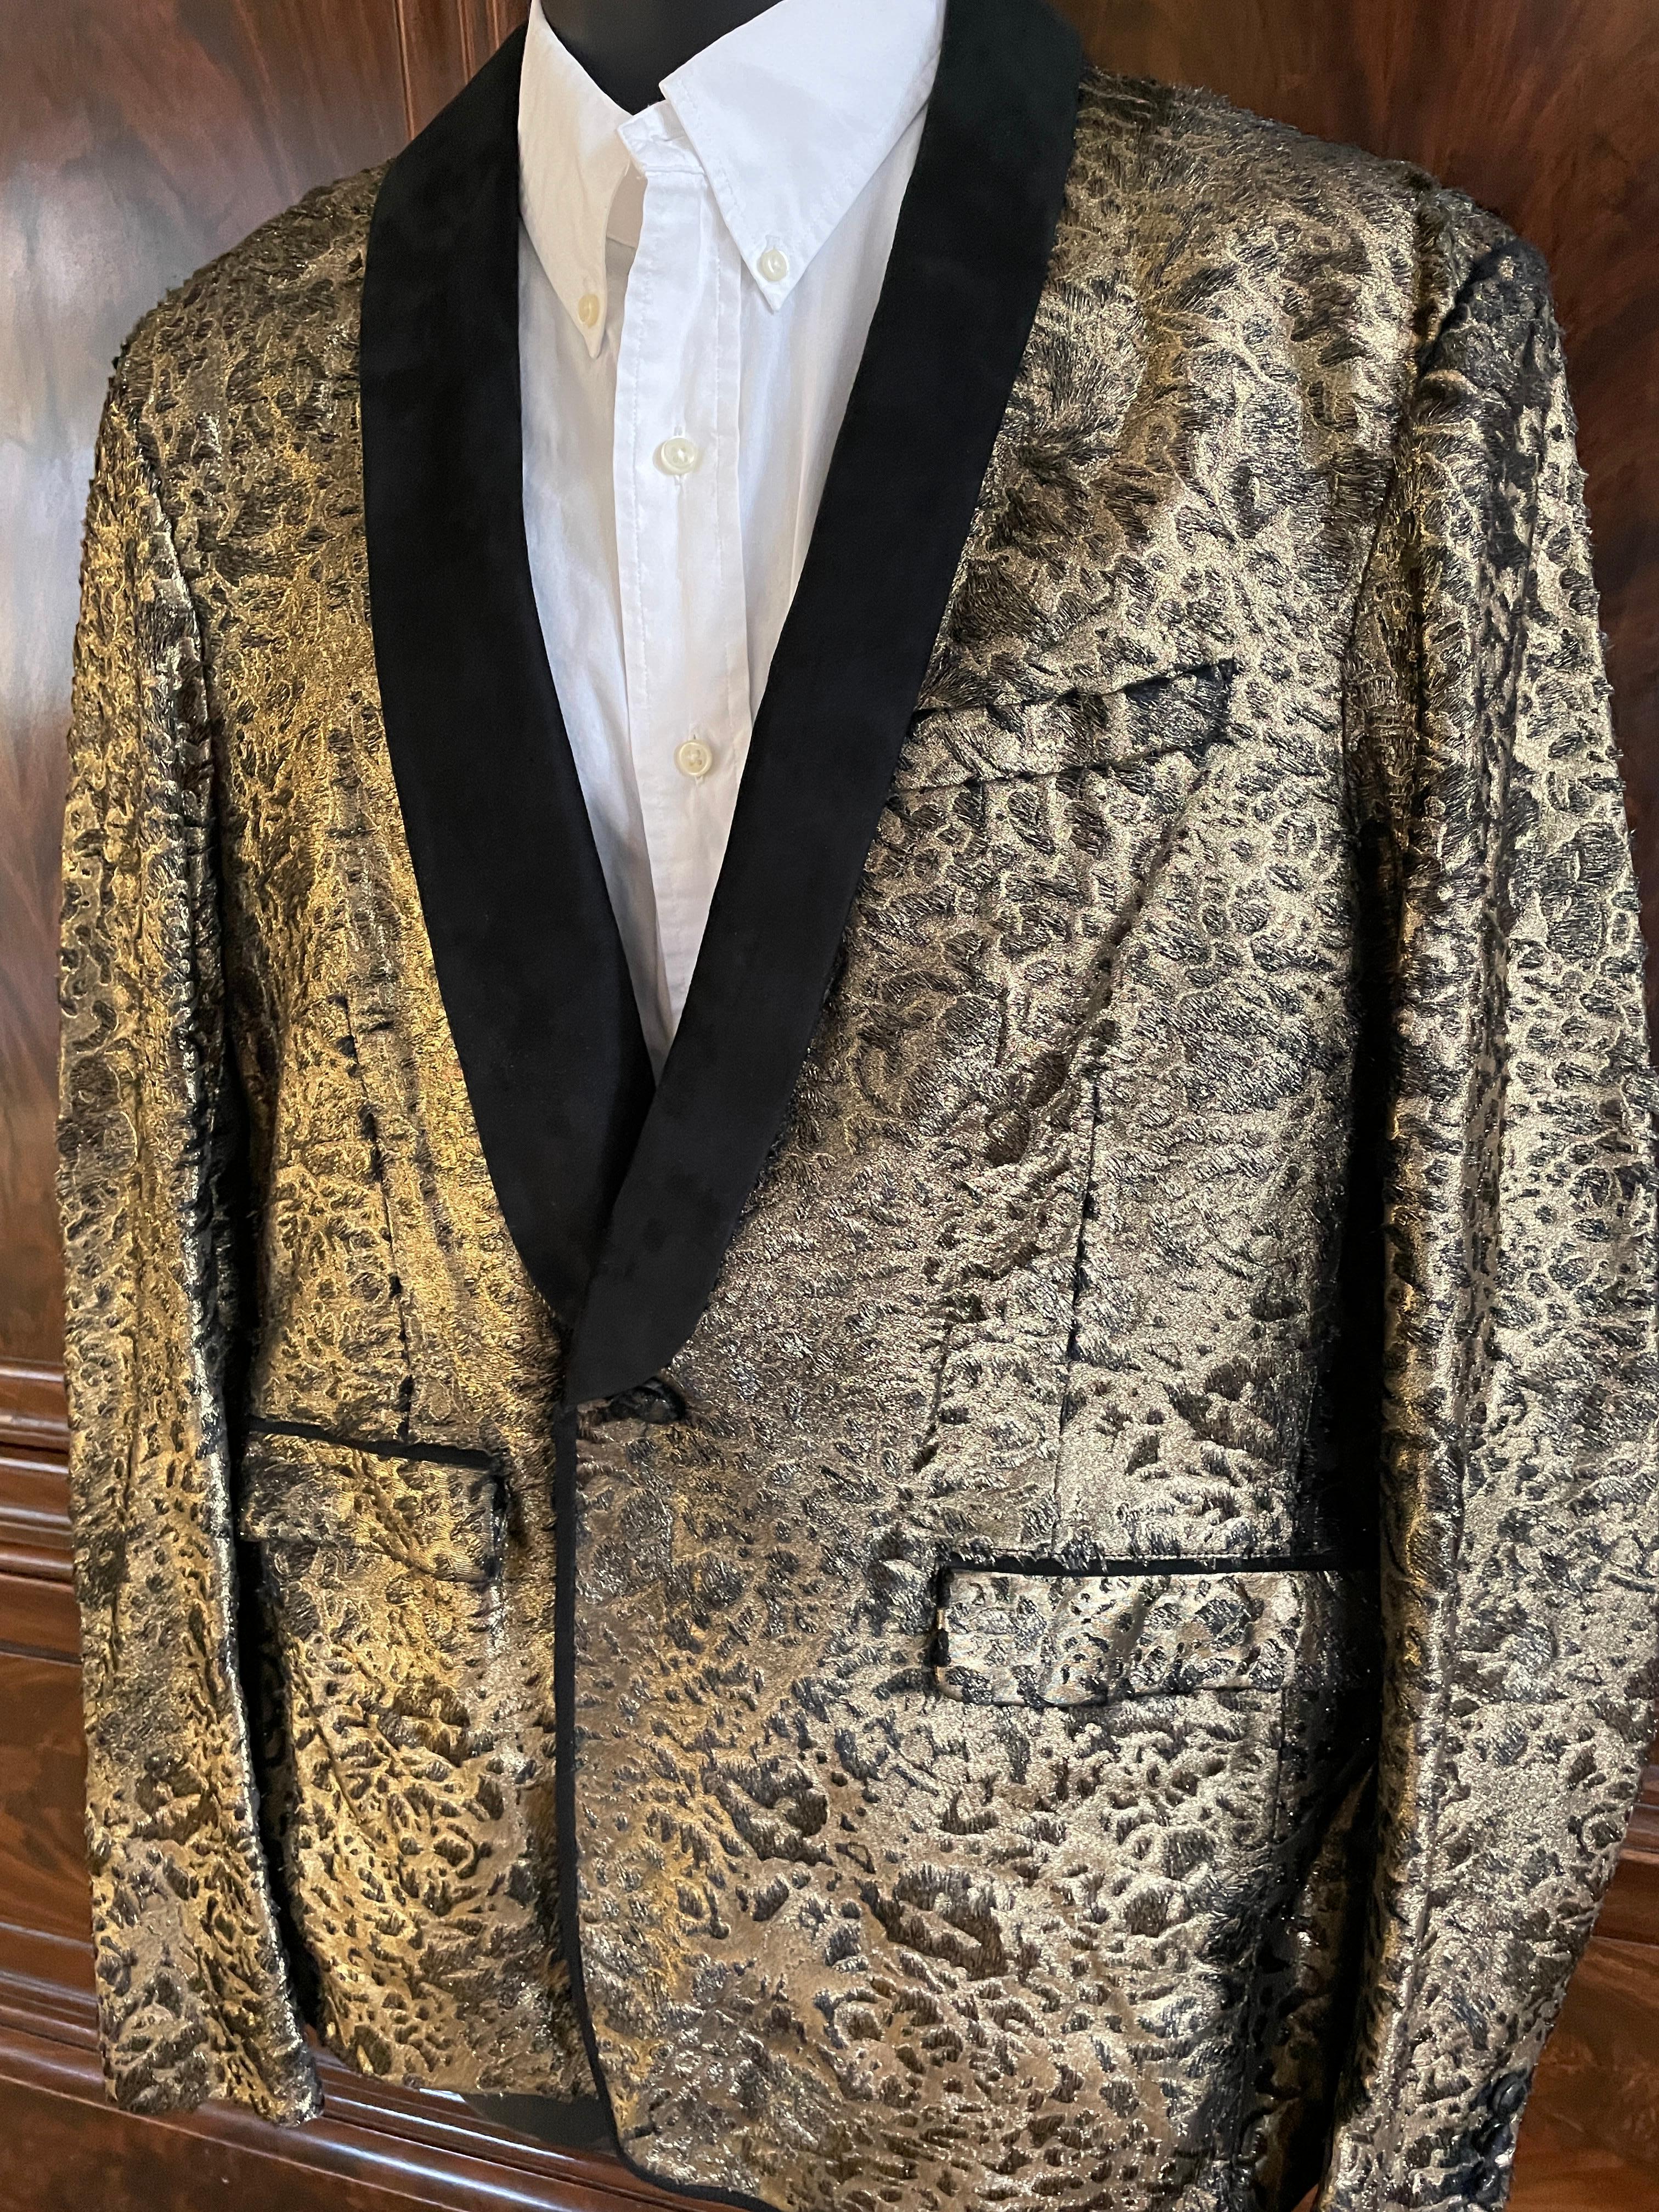 Roberto Cavalli Mens Gold Ponyskin Leather Jacket w Suede Lapels NWT $7775 In New Condition For Sale In Cloverdale, CA